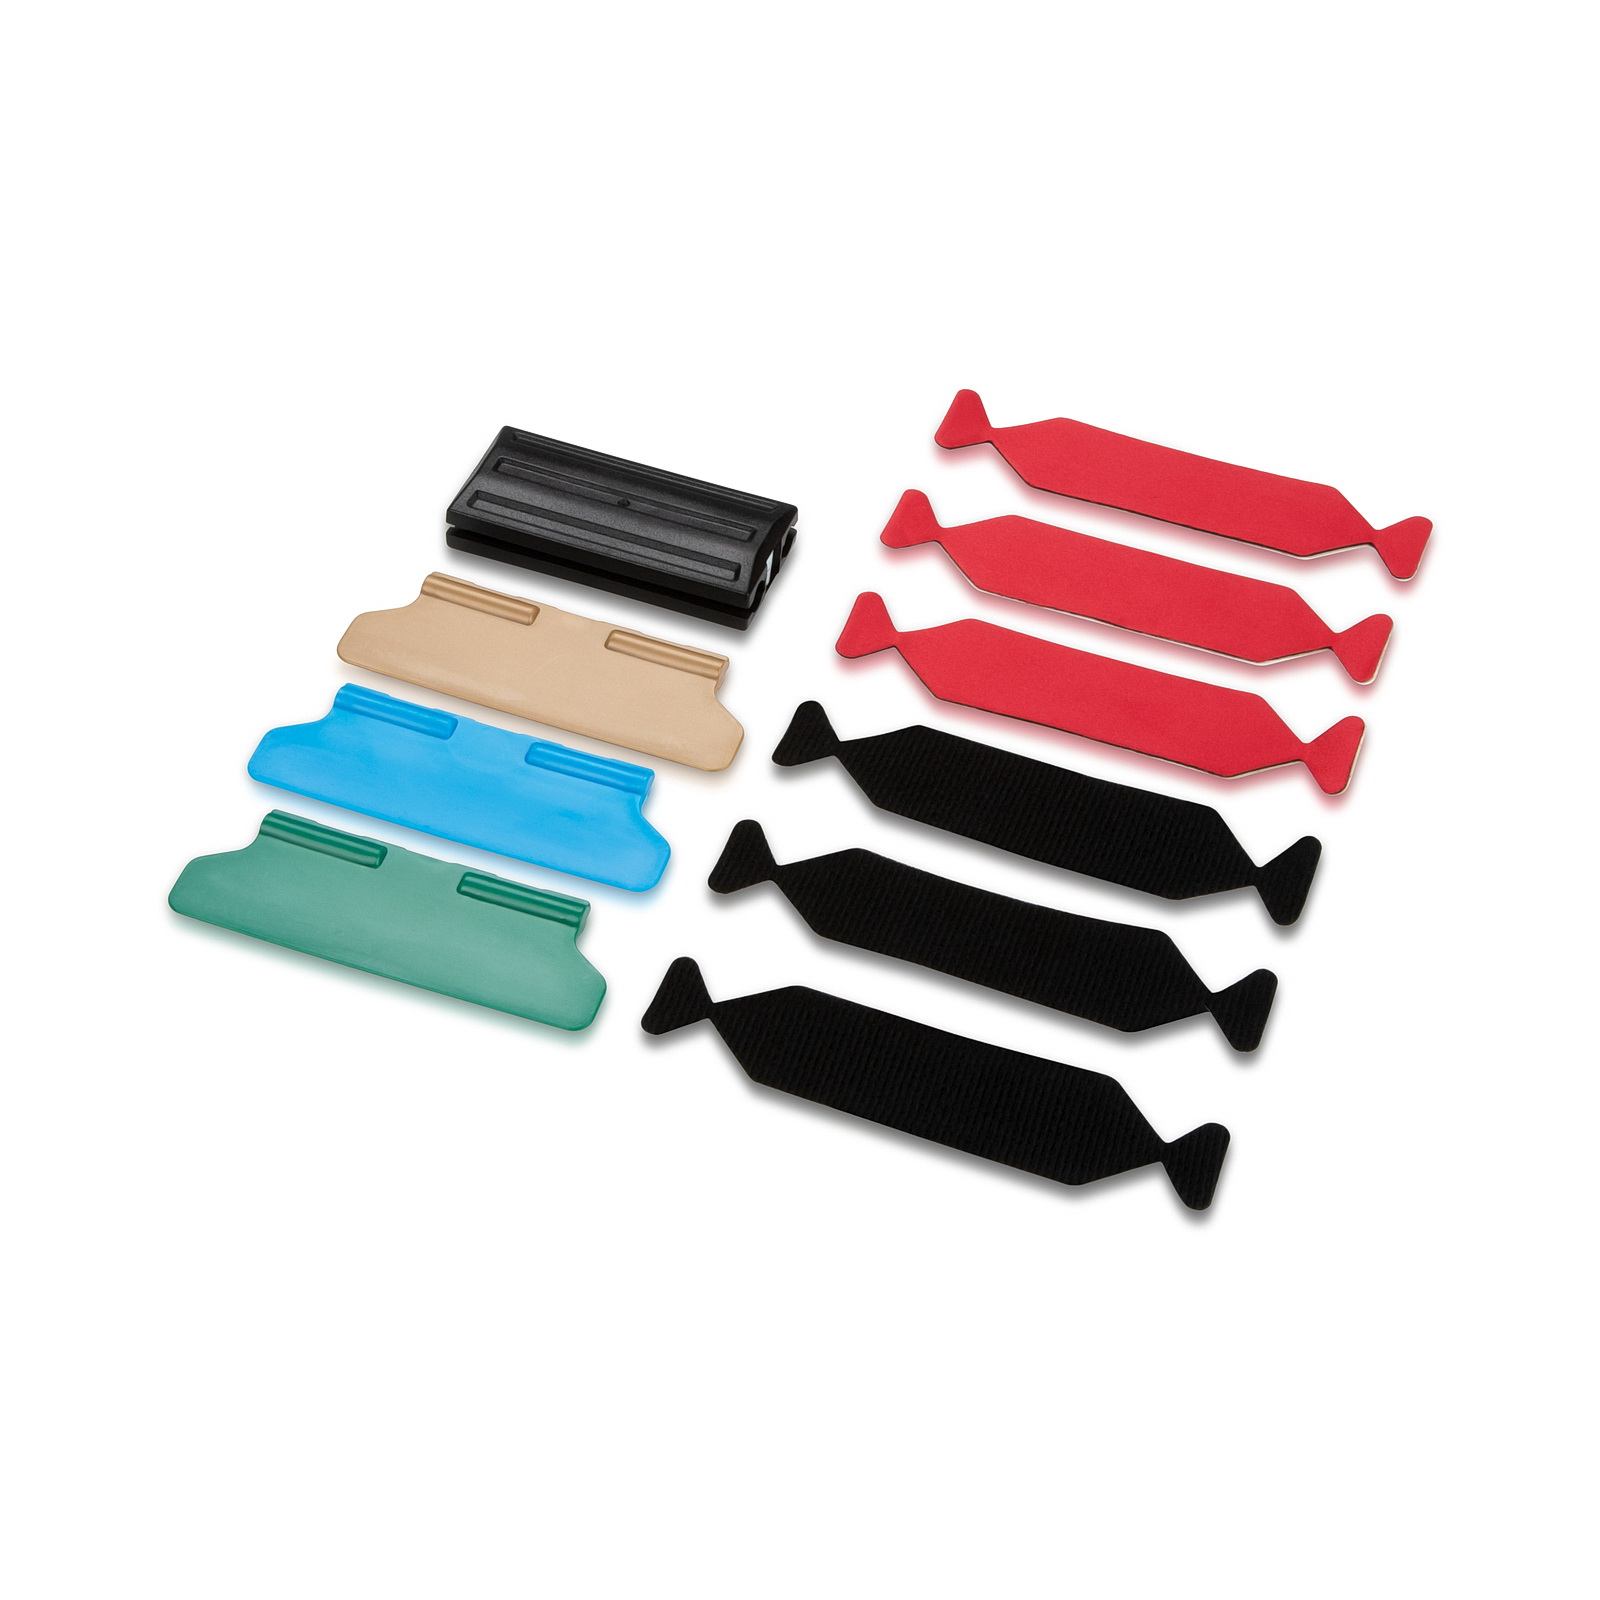 4'' x 1-1/3'', 3 in 1 Small Magnetic Squeegee Kit with 6 pcs of Felt and 3 Hardness (48 / 63 / 72 Degreee Shores)